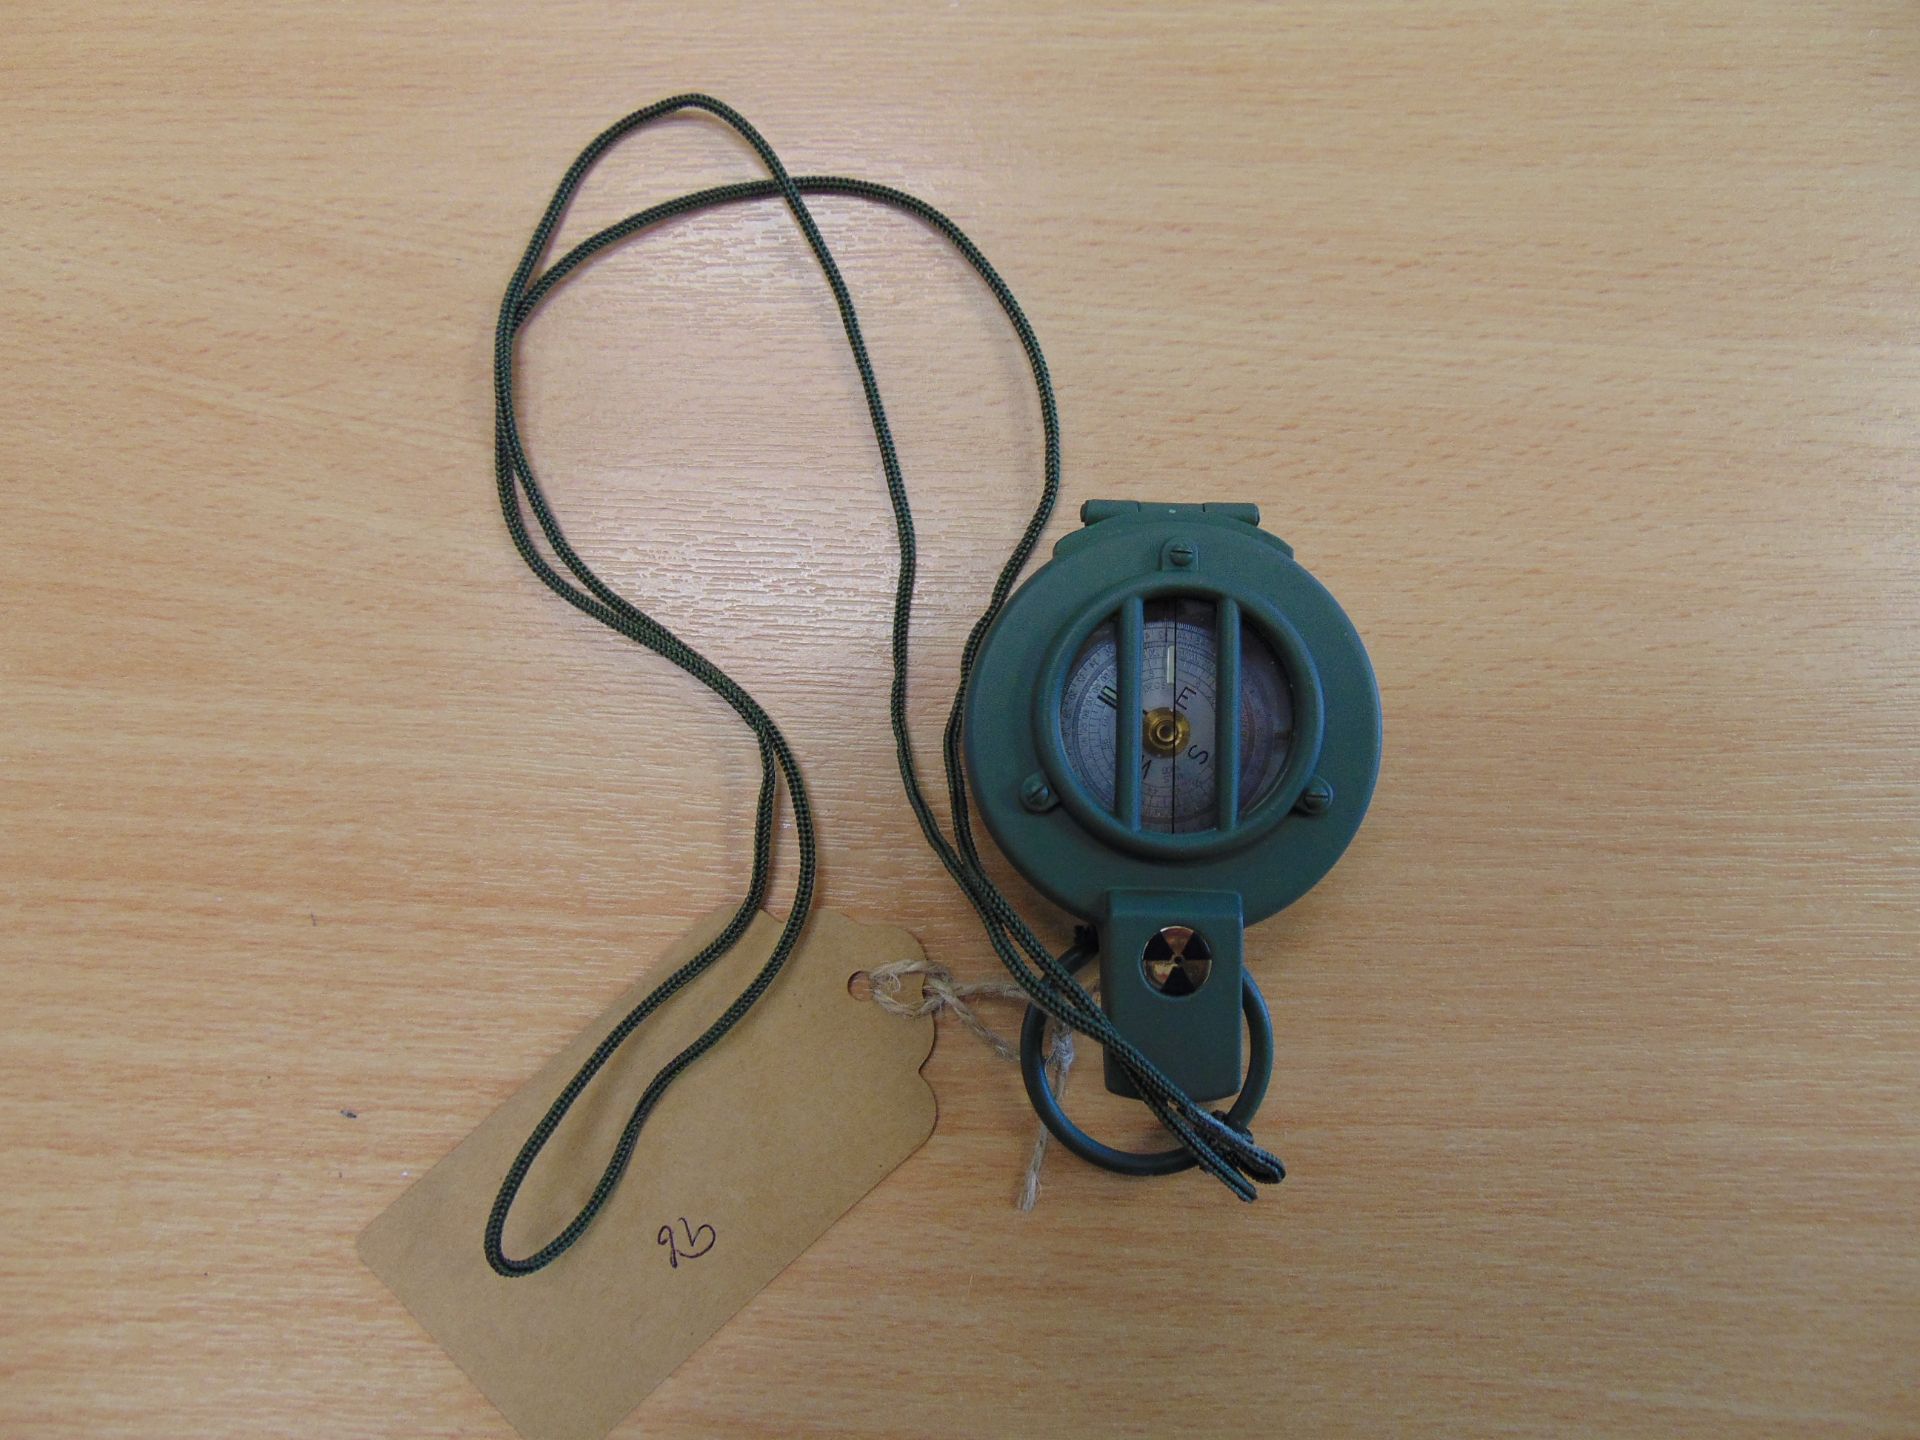 New Unissued Francis Barker M88 British Army Compass - Image 4 of 4